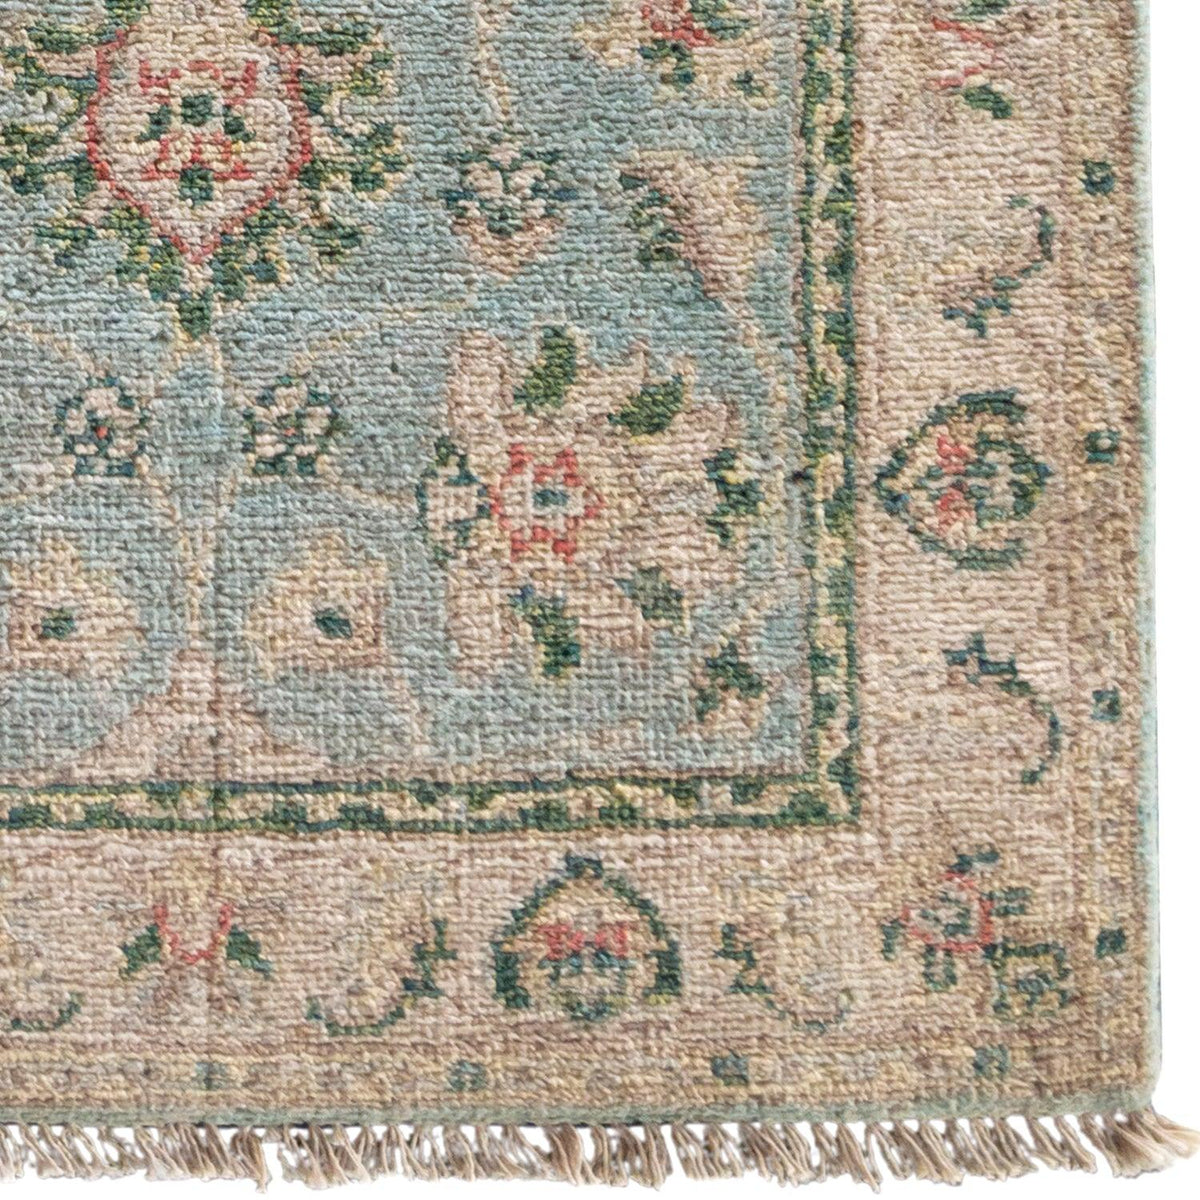 Hand-knotted Wool Extra Small Rug 60cm x 90cm